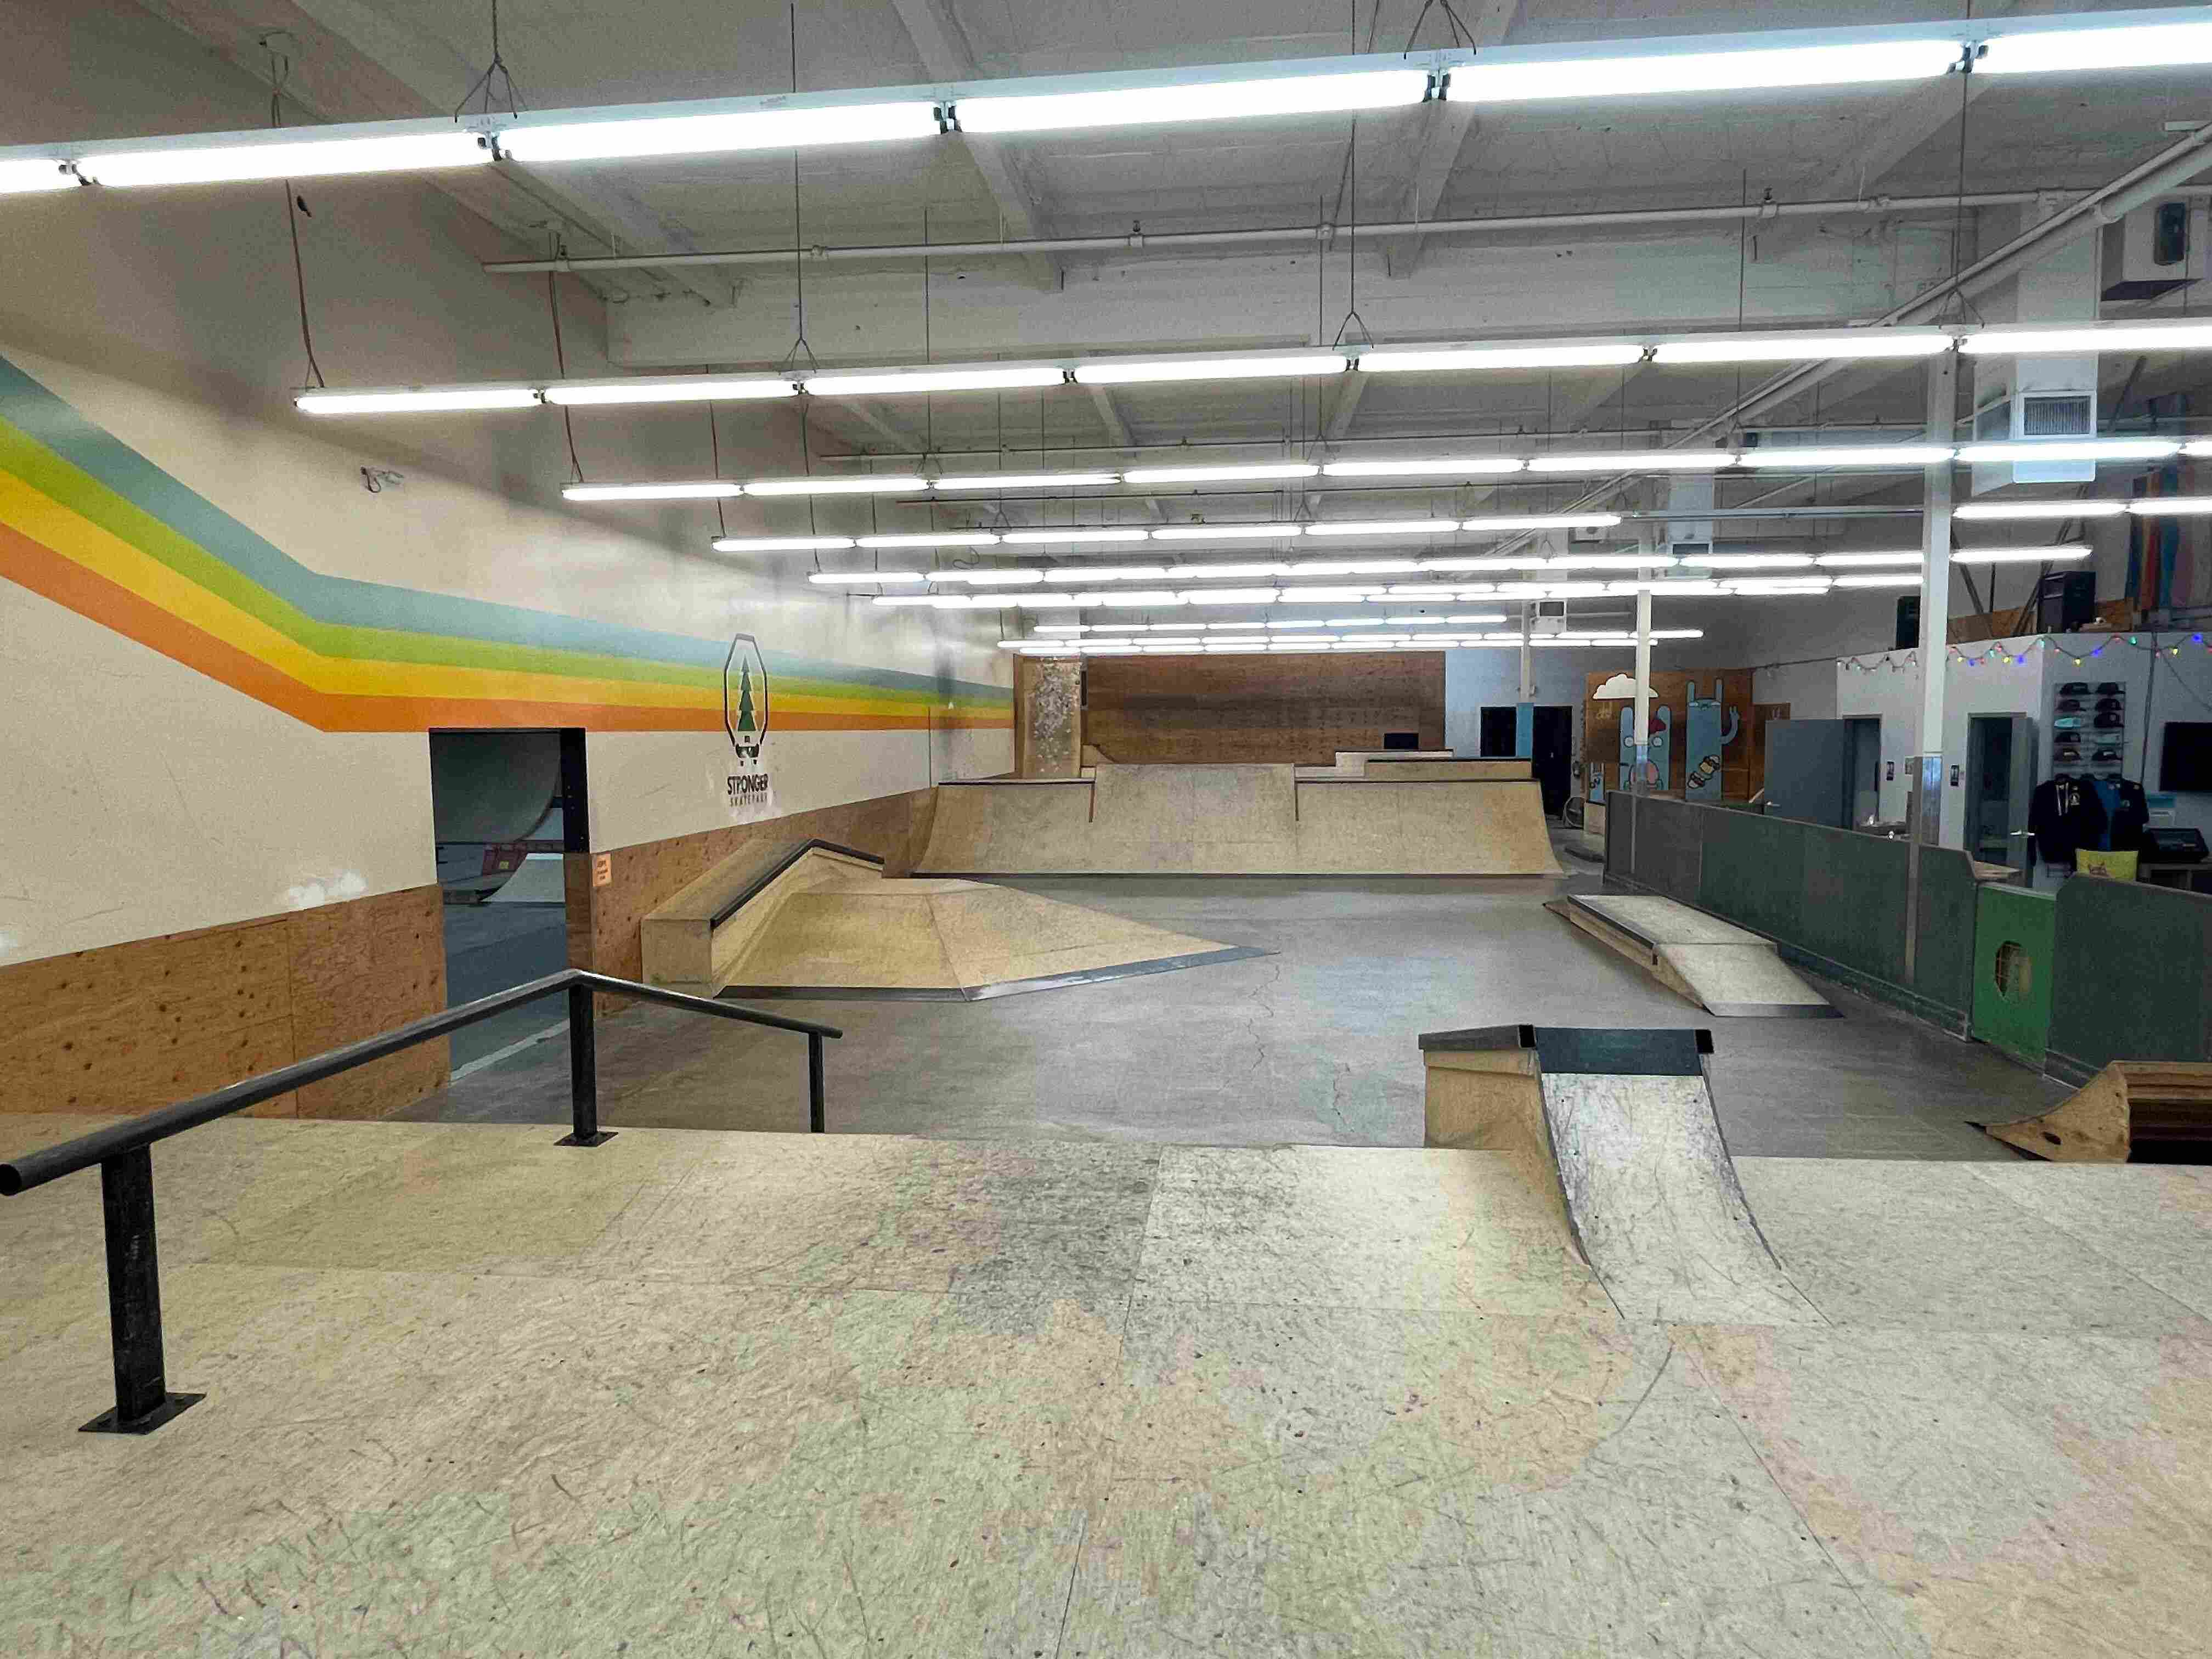 Ramps and rails fill a large open space at Stronger Indoor Skatepark